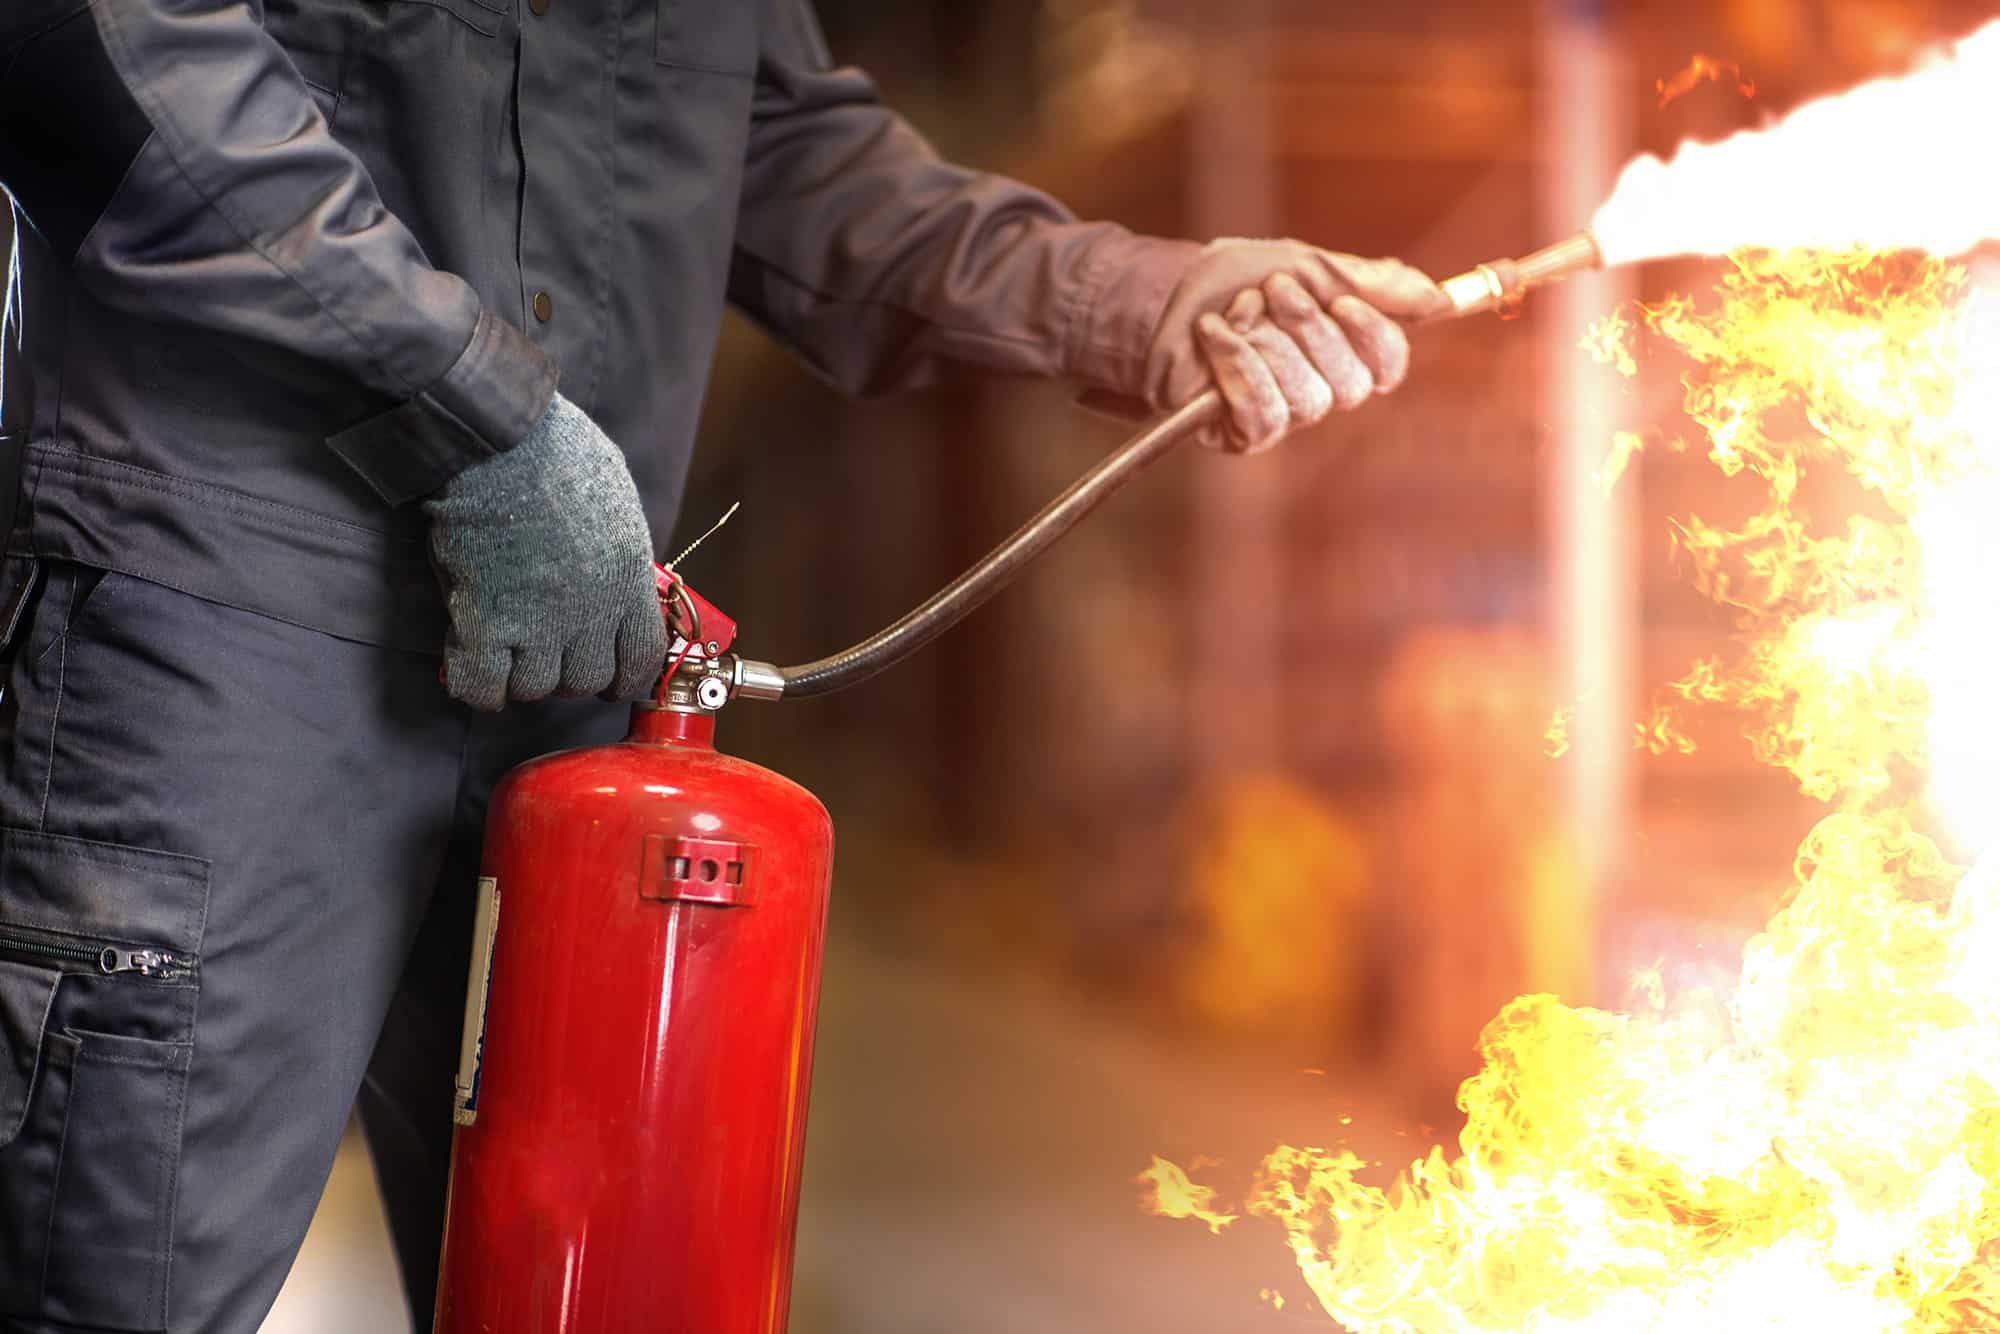 20203081_MILLENNIUM-FIRE_Social-Media-Content-Images-March-FireExtinguisher